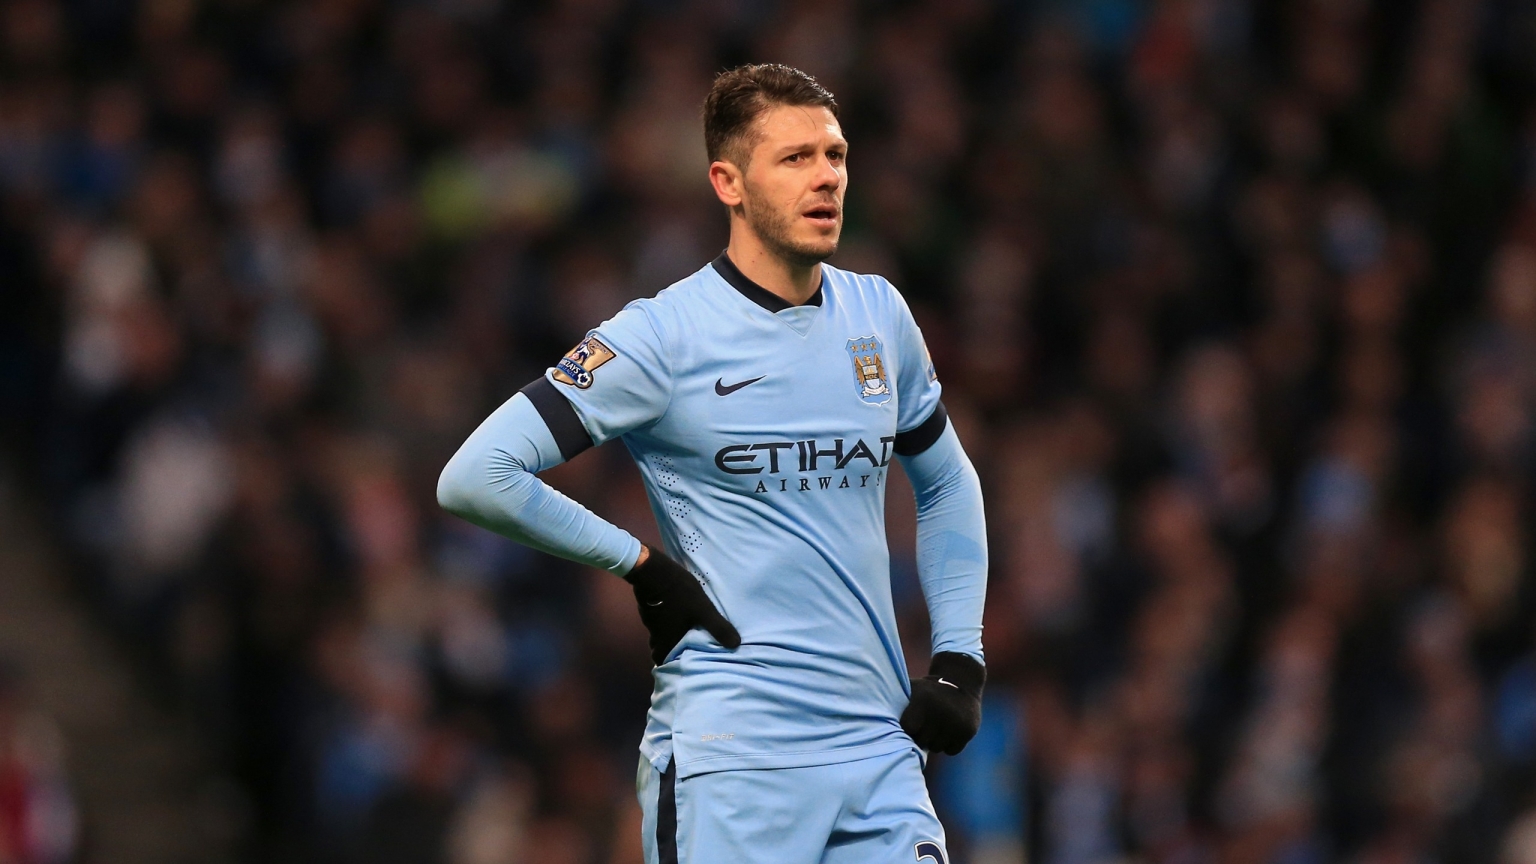 Martin Demichelis Football Player for 1536 x 864 HDTV resolution